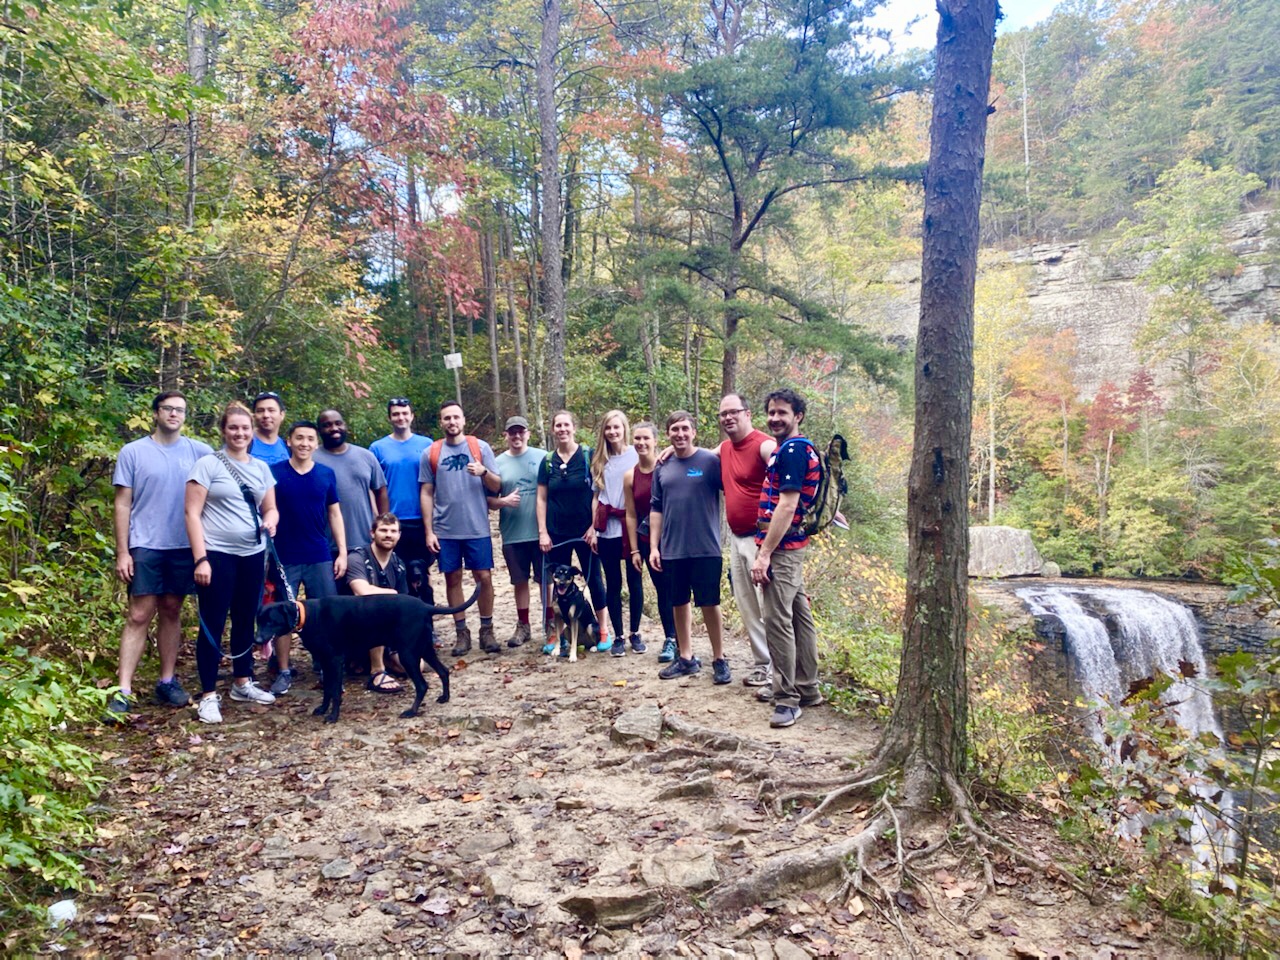 EM group out hiking in the forest near a waterfall.